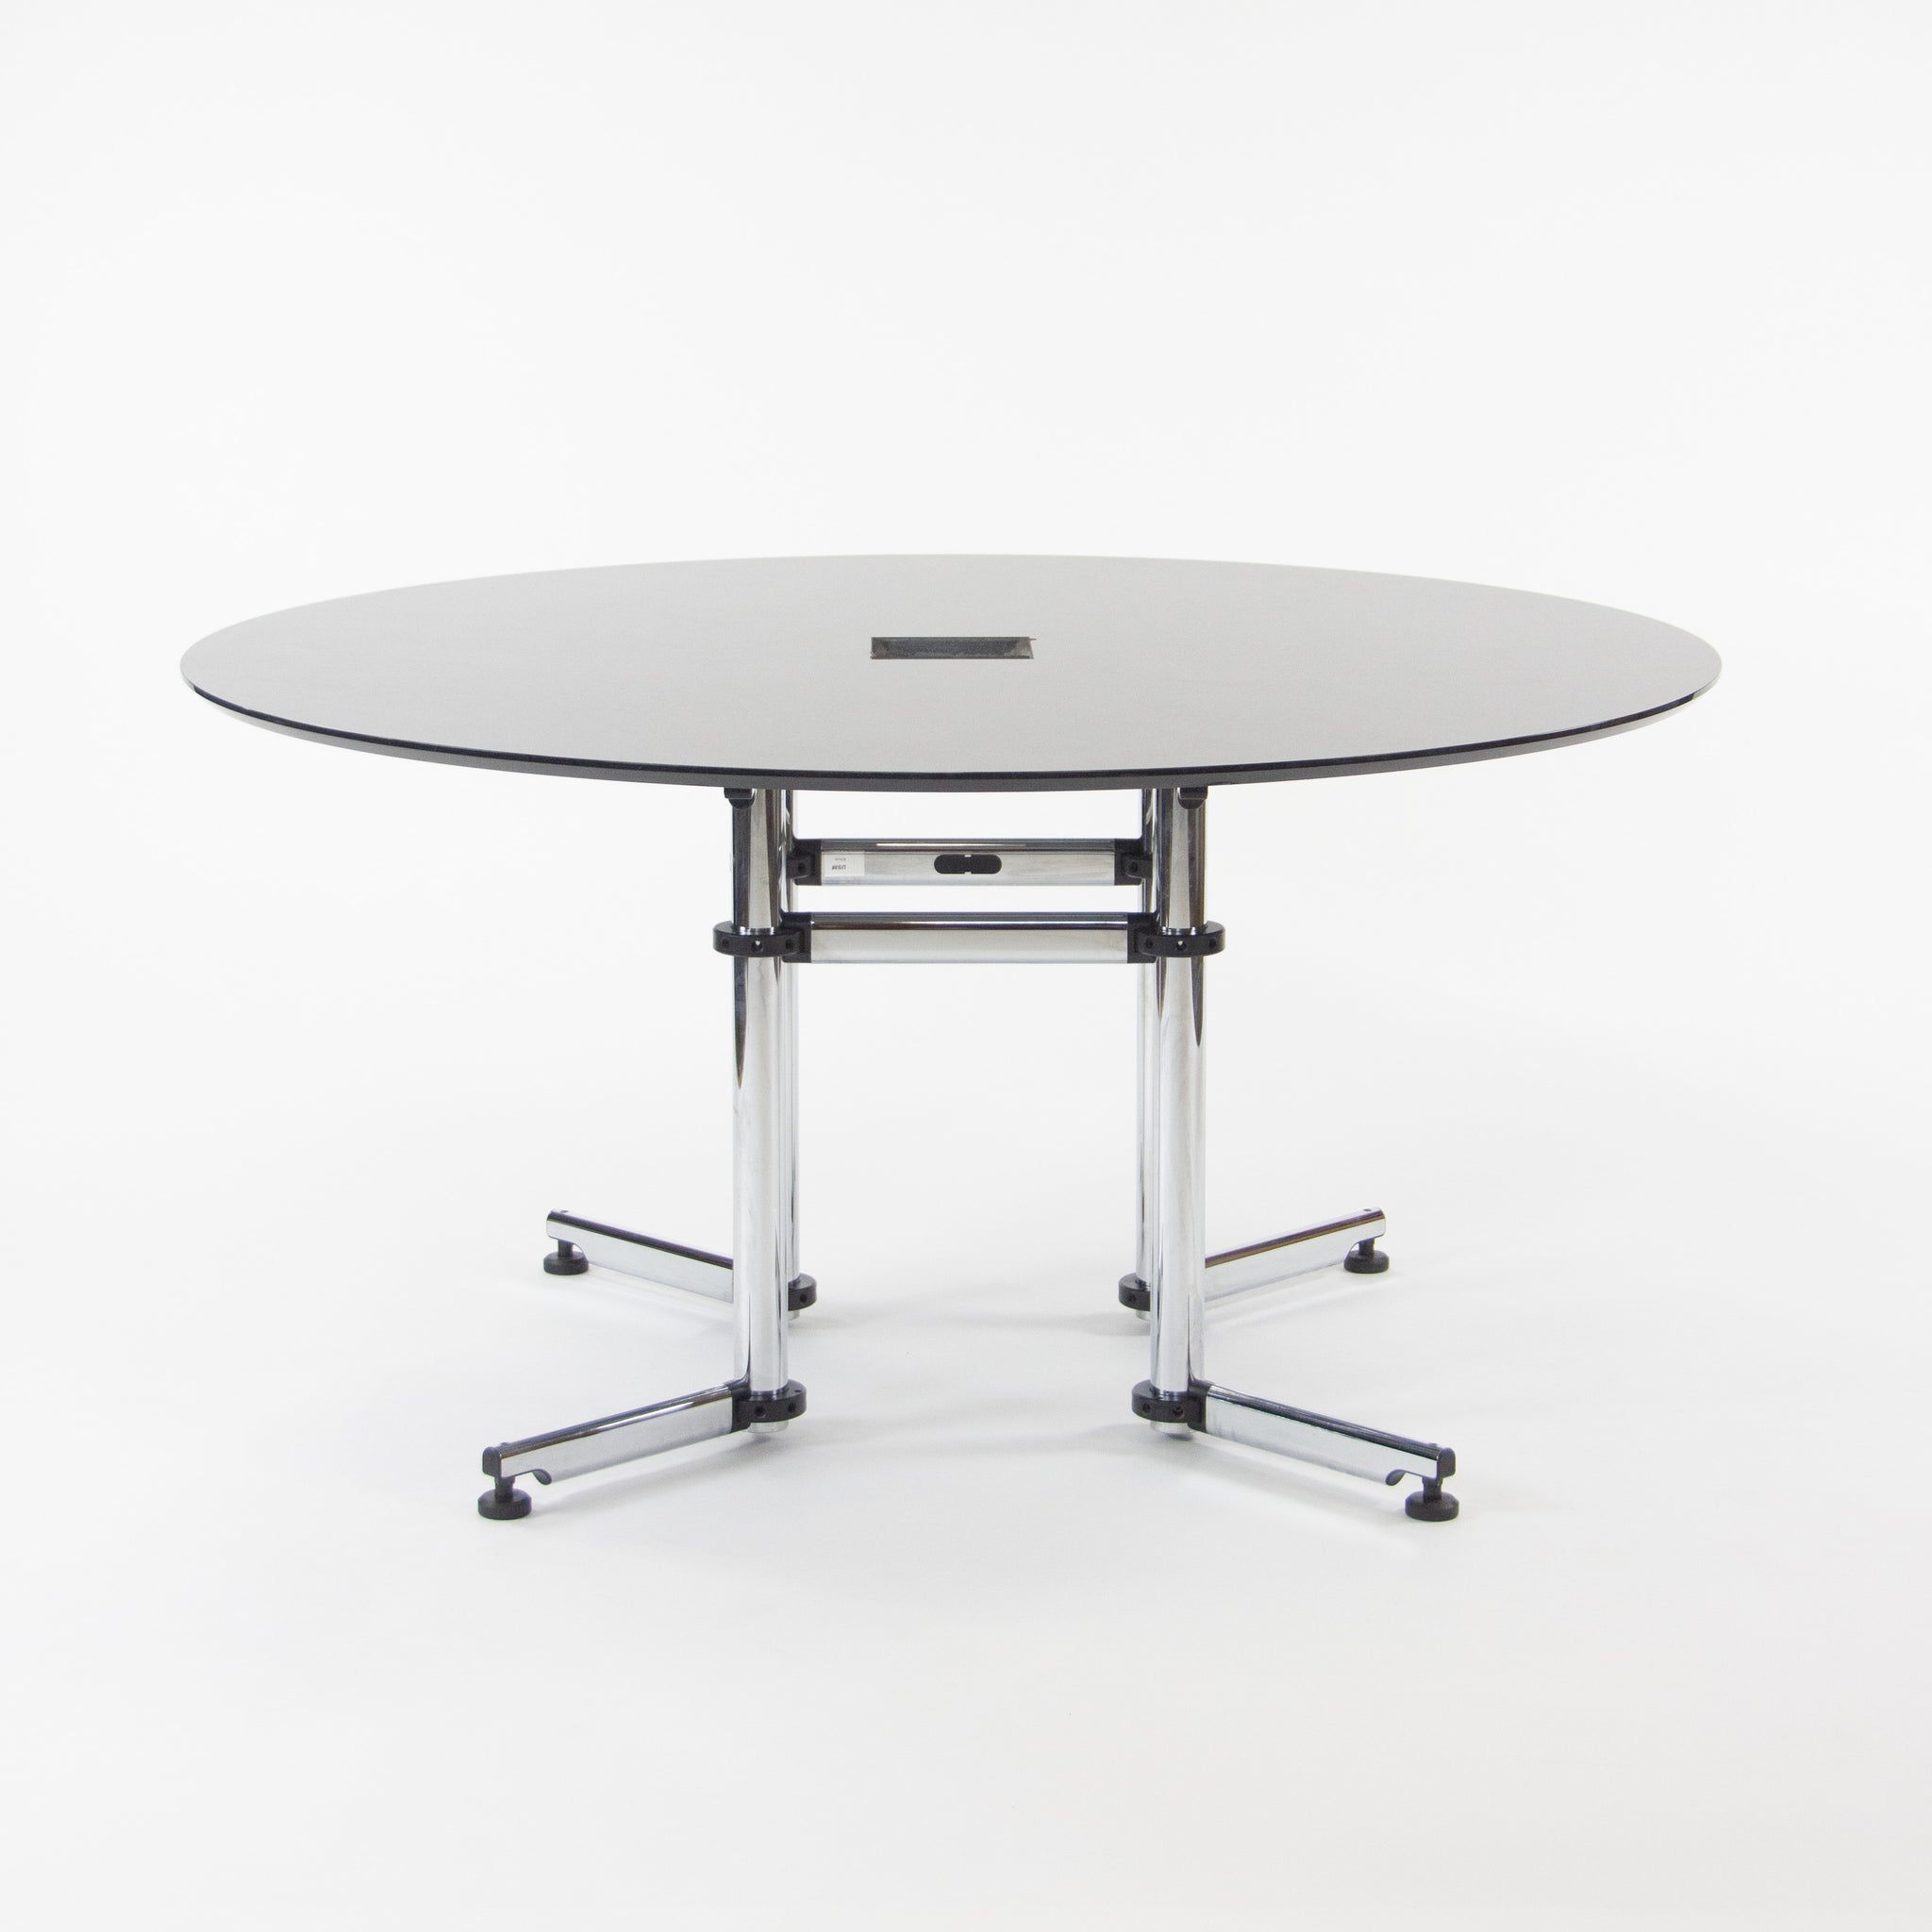 Kitos By Usm Haller 60 Inch Round Black Marble Meeting Conference